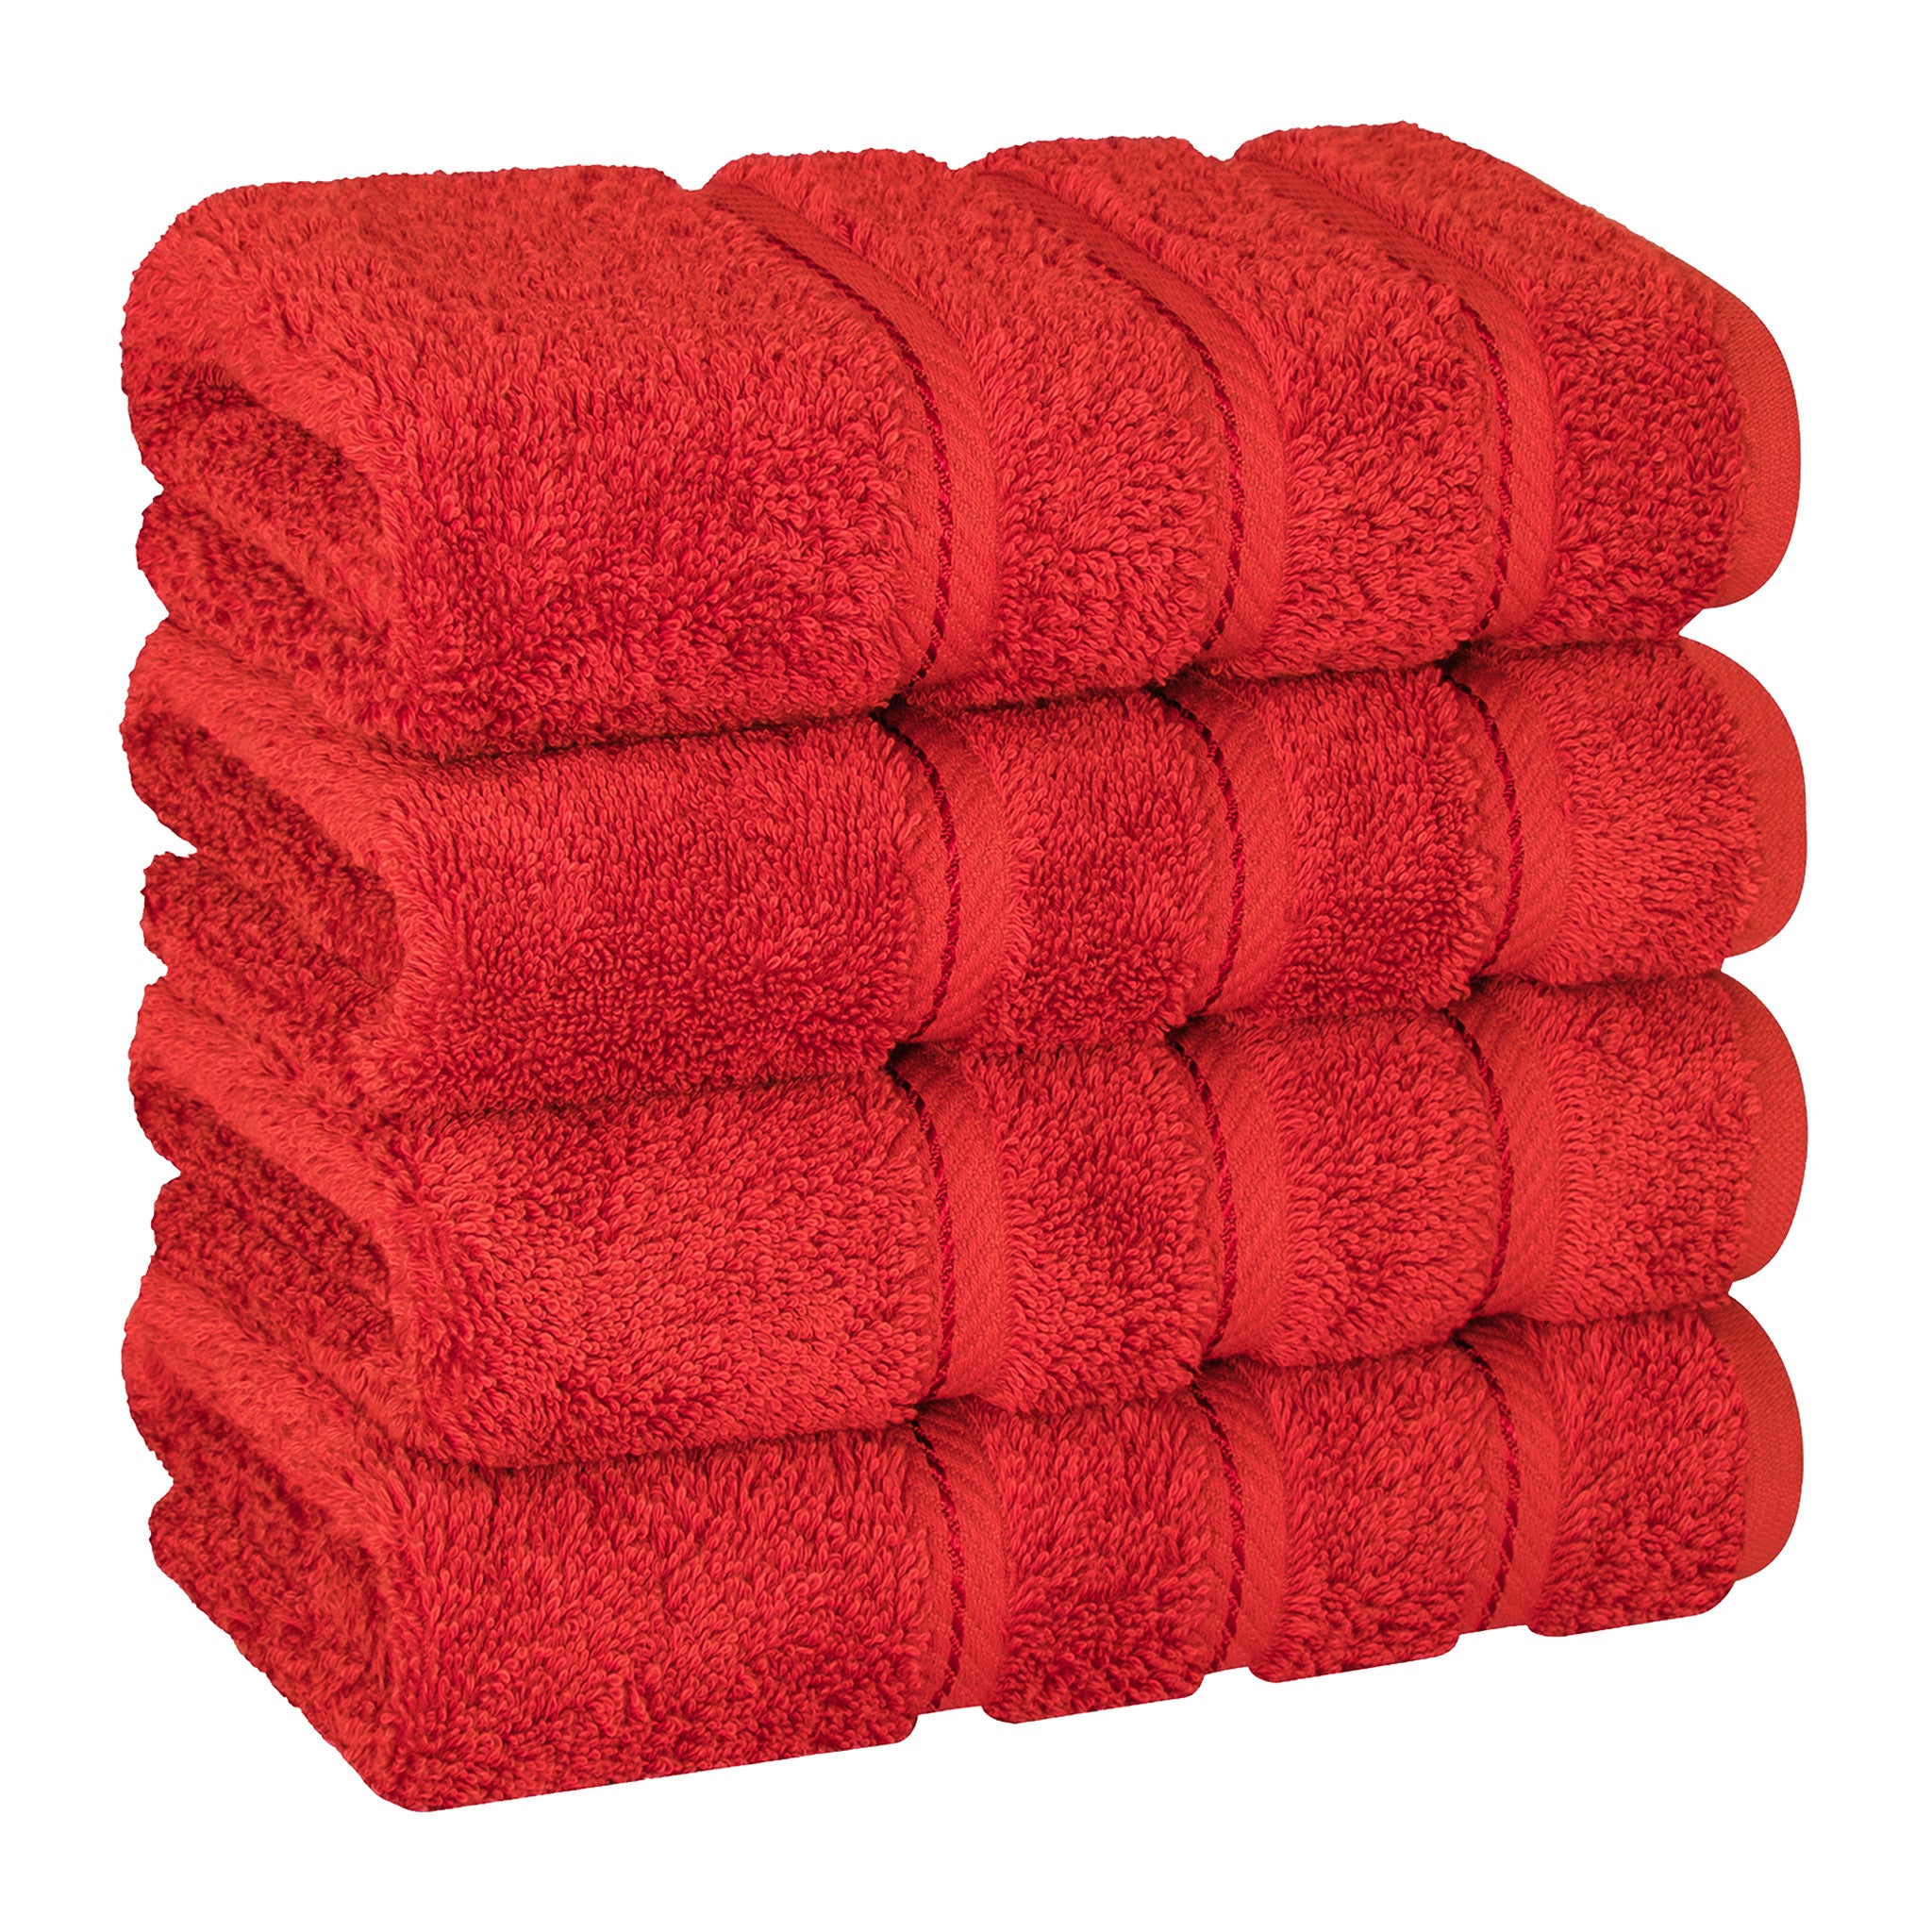 American Soft Linen 100% Turkish Cotton 4 Pack Hand Towel Set red-1